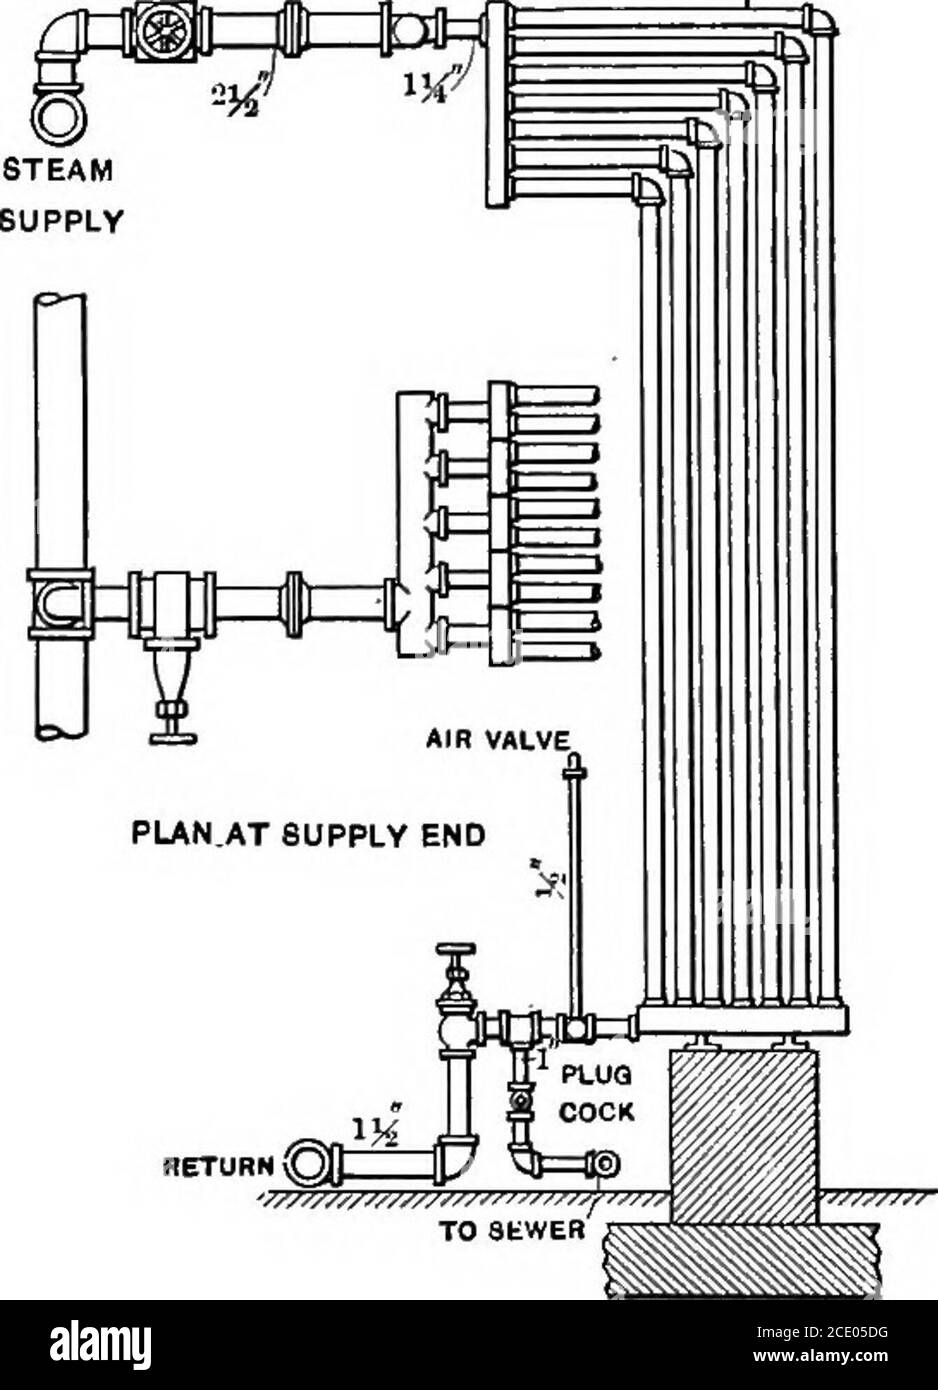 . Power, heating and ventilation ... a treatise for designing and constructing engineers, architects and students . ur^r ^??^^^?^(fj^ 3 3.. V^^A^^W/^^/^/WJ/WWj&gt;/j&gt;-&gt;W/ FBONT VIEW SIDE VIEW Fig. 152. Special Heater for Ventilating. In the case of vertical-pipe and similar heaters the bases areusually below the water-line of the boilers, and the condensationmust be returned by the use of traps and pumps. Vento Heater.—^The Vento cast-iron heater, made by theAmerican Radiator Company, is shown in Fig. 153. This isconstructed especially for hot-blast work and is made up of sec-tions with Stock Photo